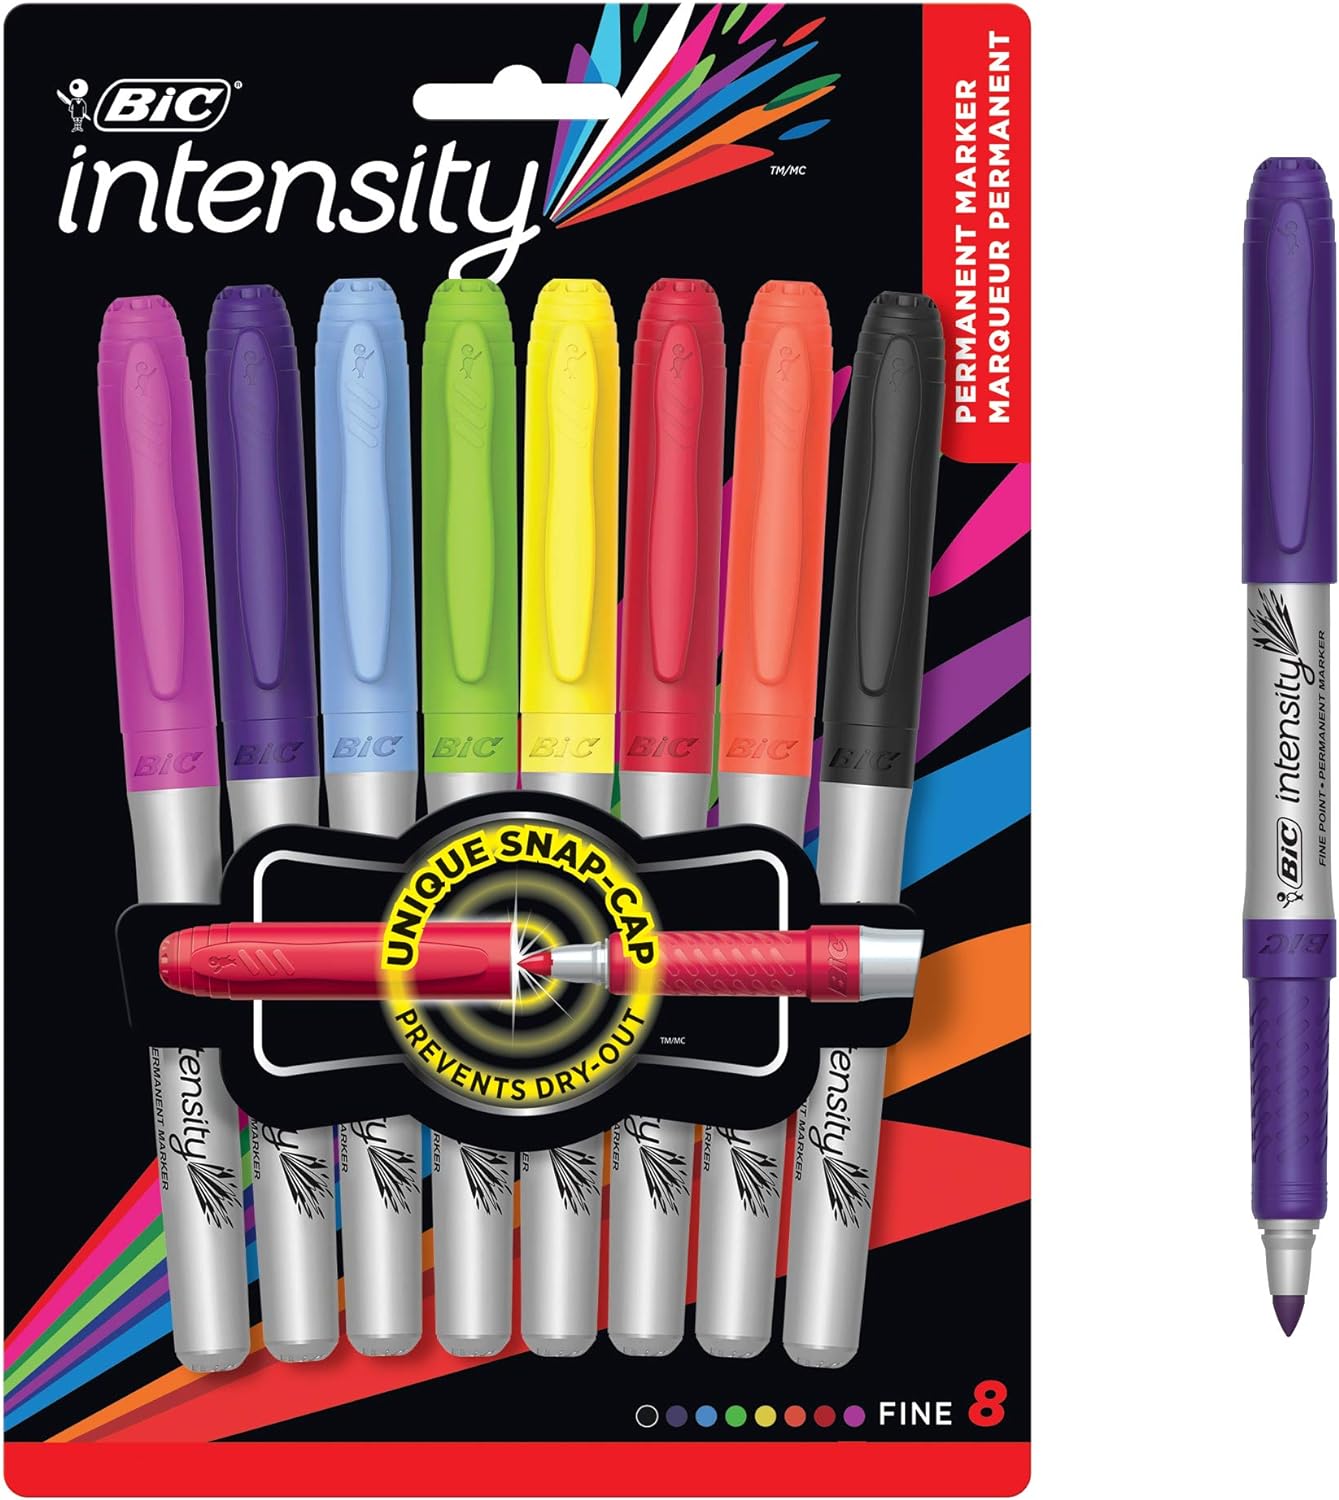 My daughter and I both enjoy using the Bic markers in our adult coloring books.The colors are true to what the cap shows. And the saturation is great. I love the color selection and the gradation this package offers.Excellent product !